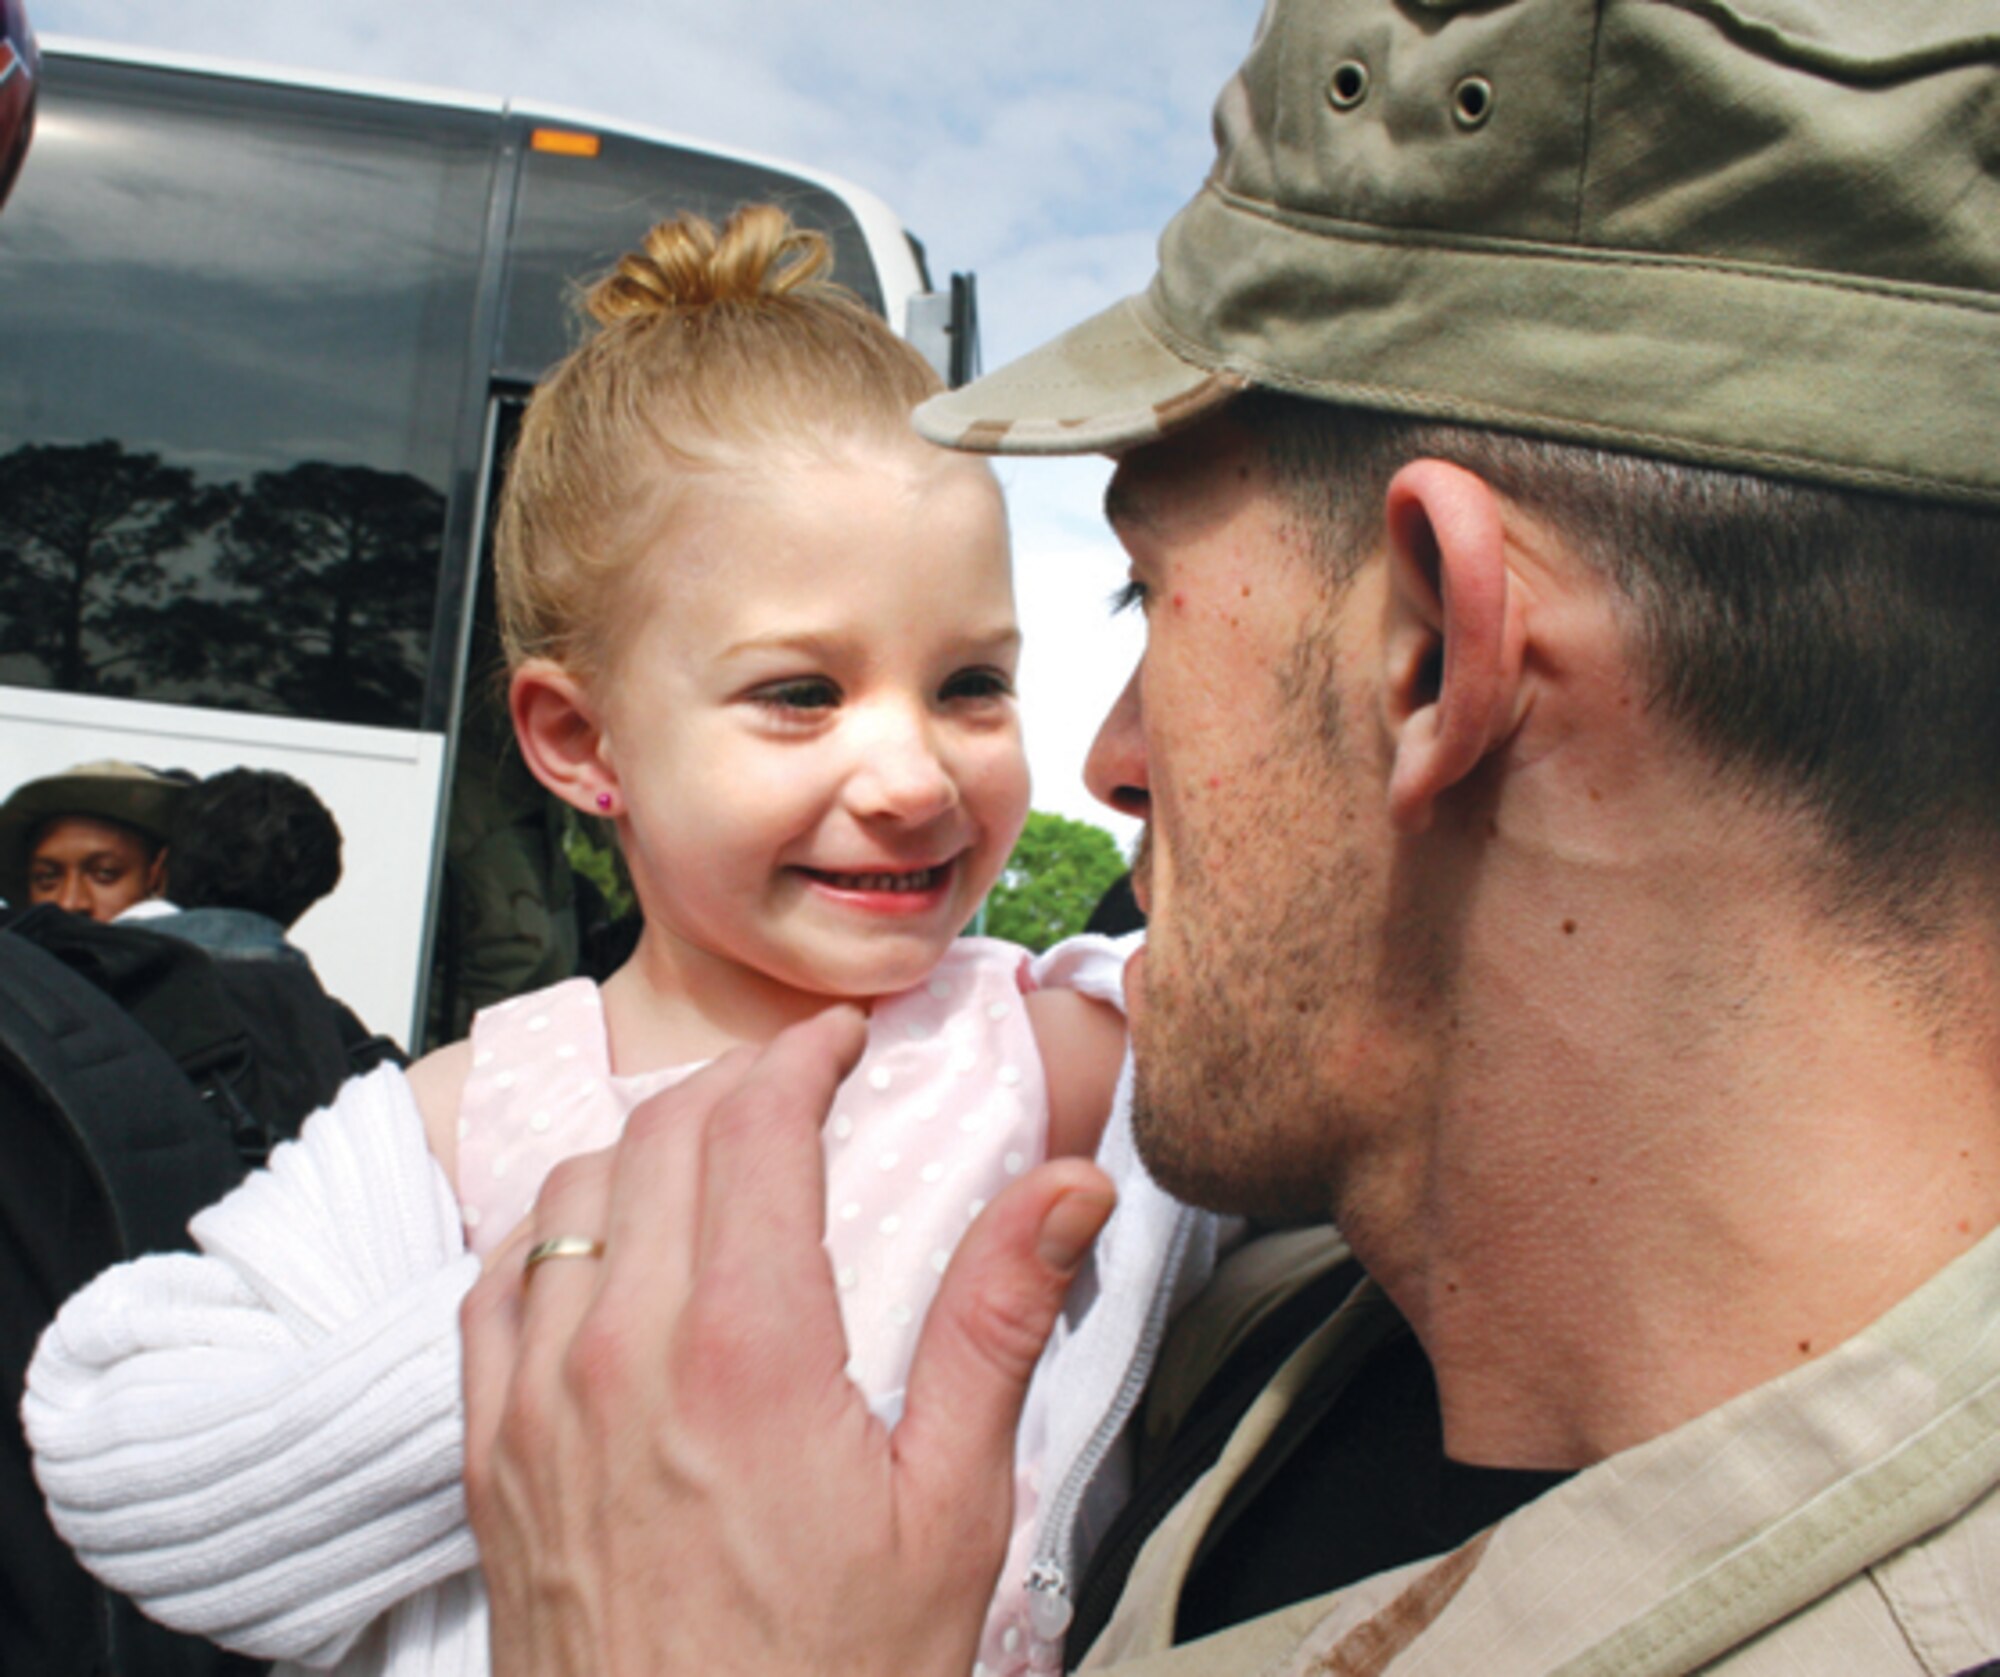 Senior Airman Craig White, 78th Security Forces Squadron, greets his daughter Alexis, 3. (U.S. Air Force photo by Amanda Creel)